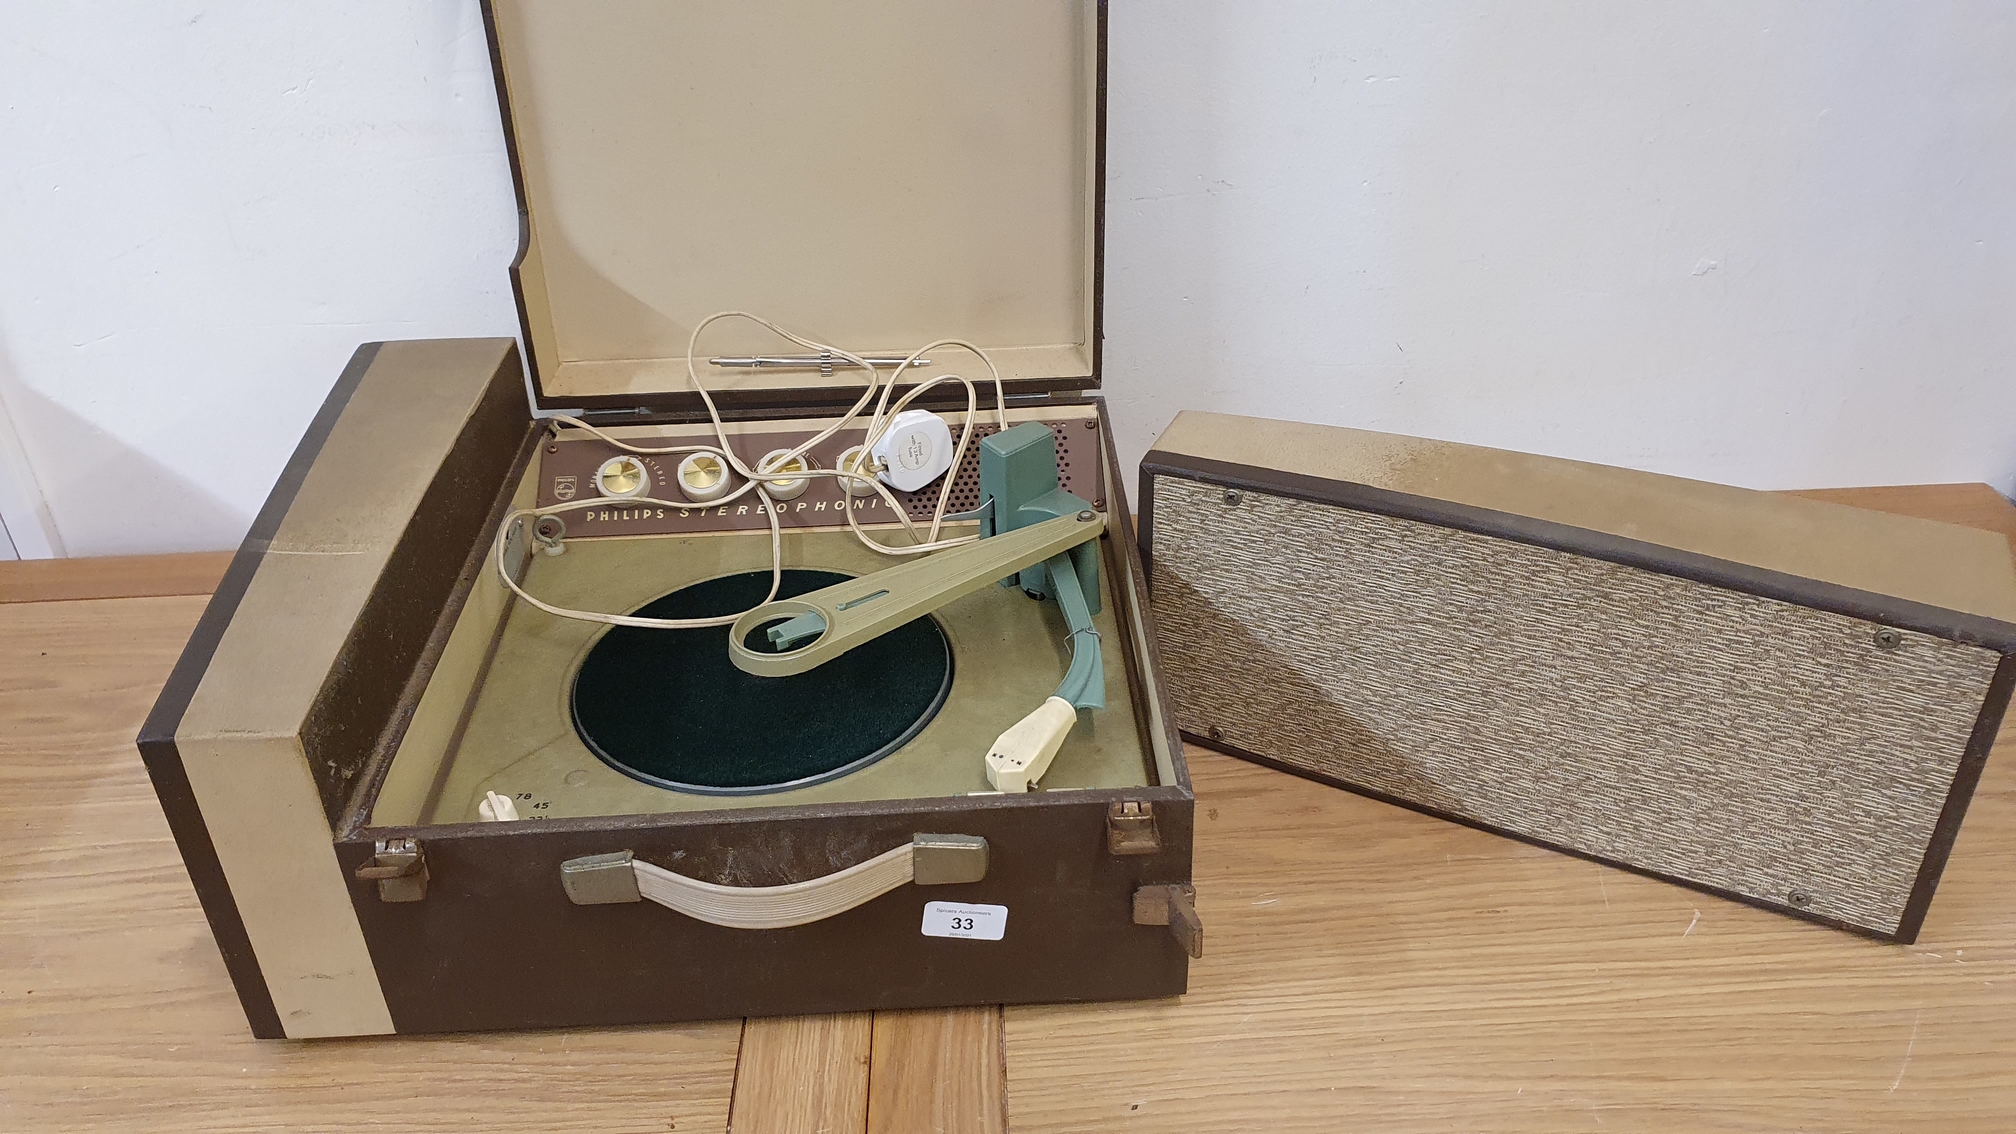 A Philips Stereophonic record player with detachable speaker and two suitcases (3).